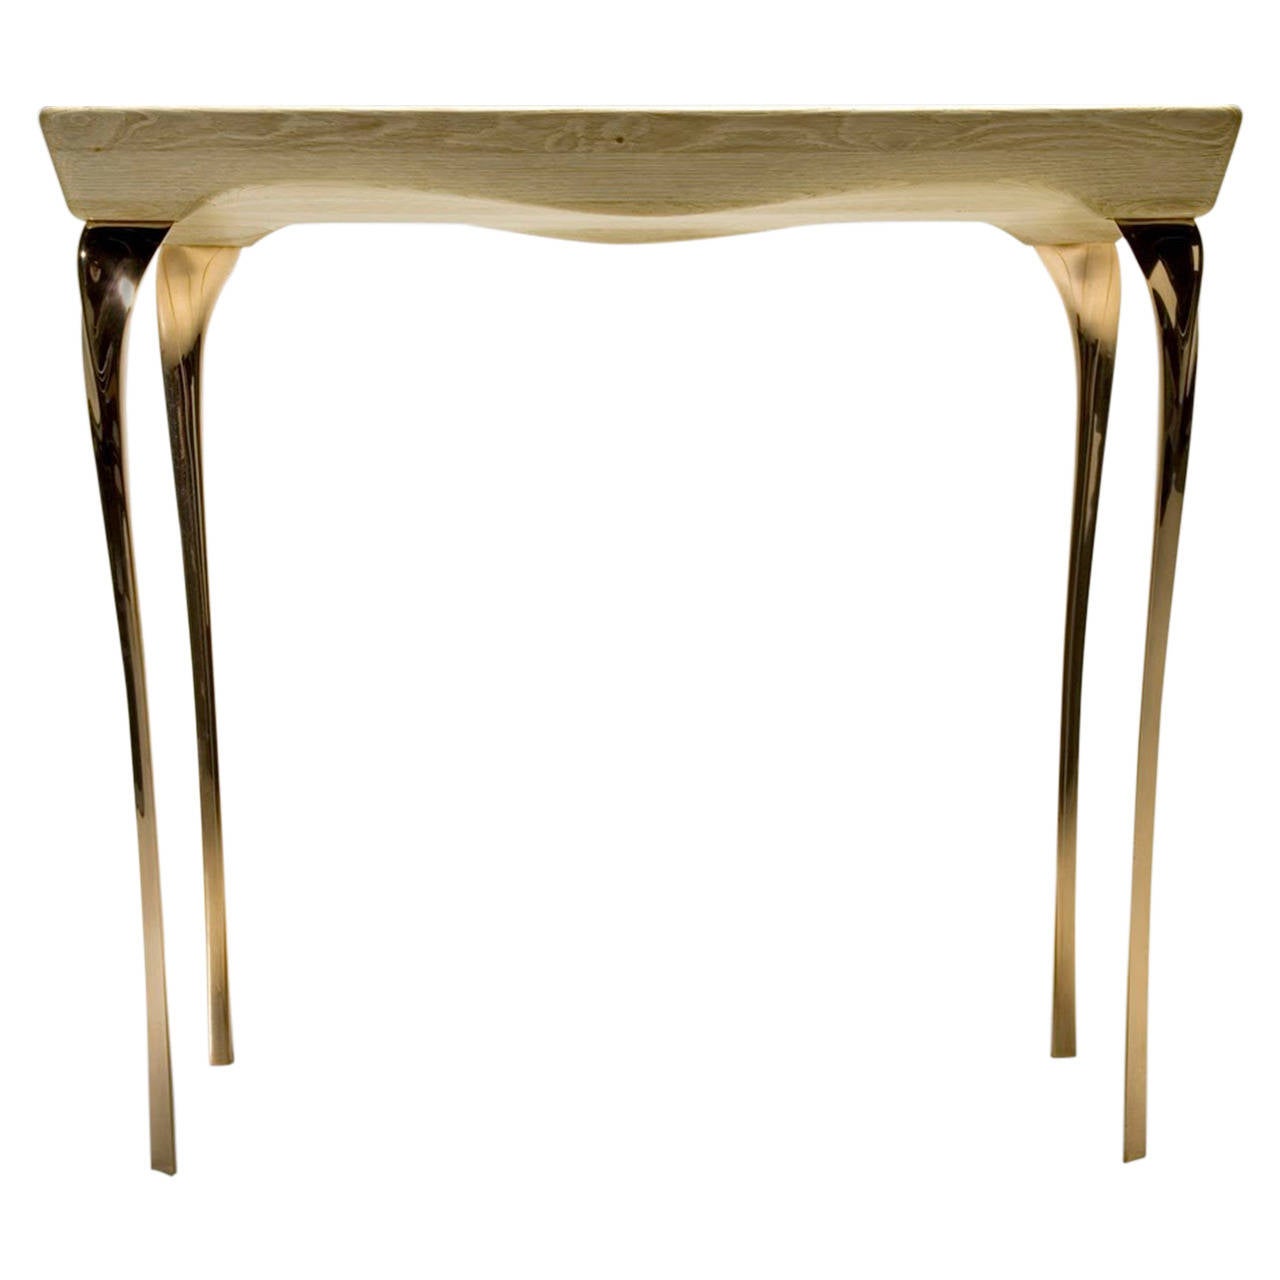 Contemporary Bronze and Oak Console Table by the British Designer Kinsley Byrne For Sale